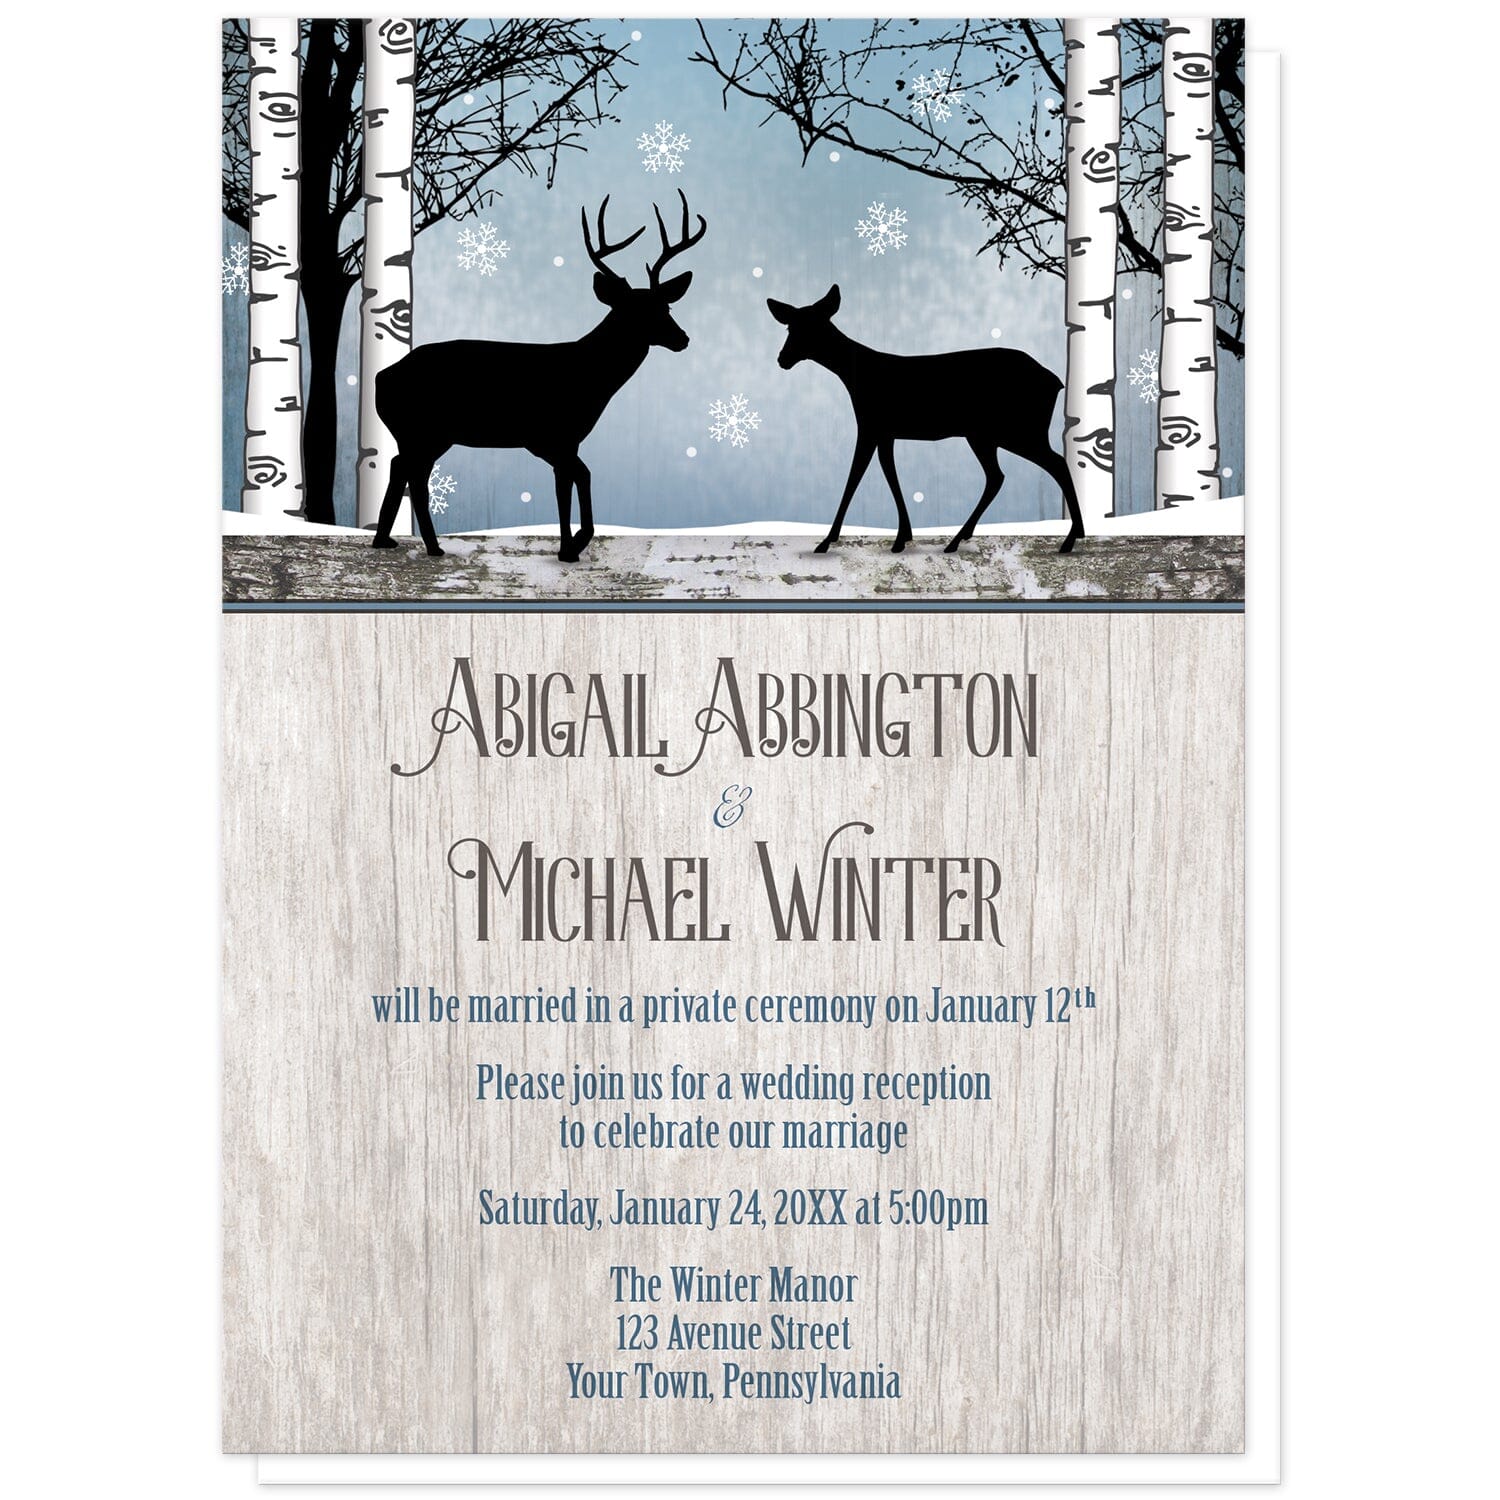 Rustic Blue Winter Deer Reception Only Invitations at Artistically Invited. Rustic blue winter deer reception only invitations with two silhouettes of deer surrounded by white birch trees over a snowy blue background with snowflakes. One silhouette is of a buck deer with antlers while the other is a gentle doe, meeting in the middle. Your personalized post-wedding reception details are custom printed in blue and brown over a light country wood background.